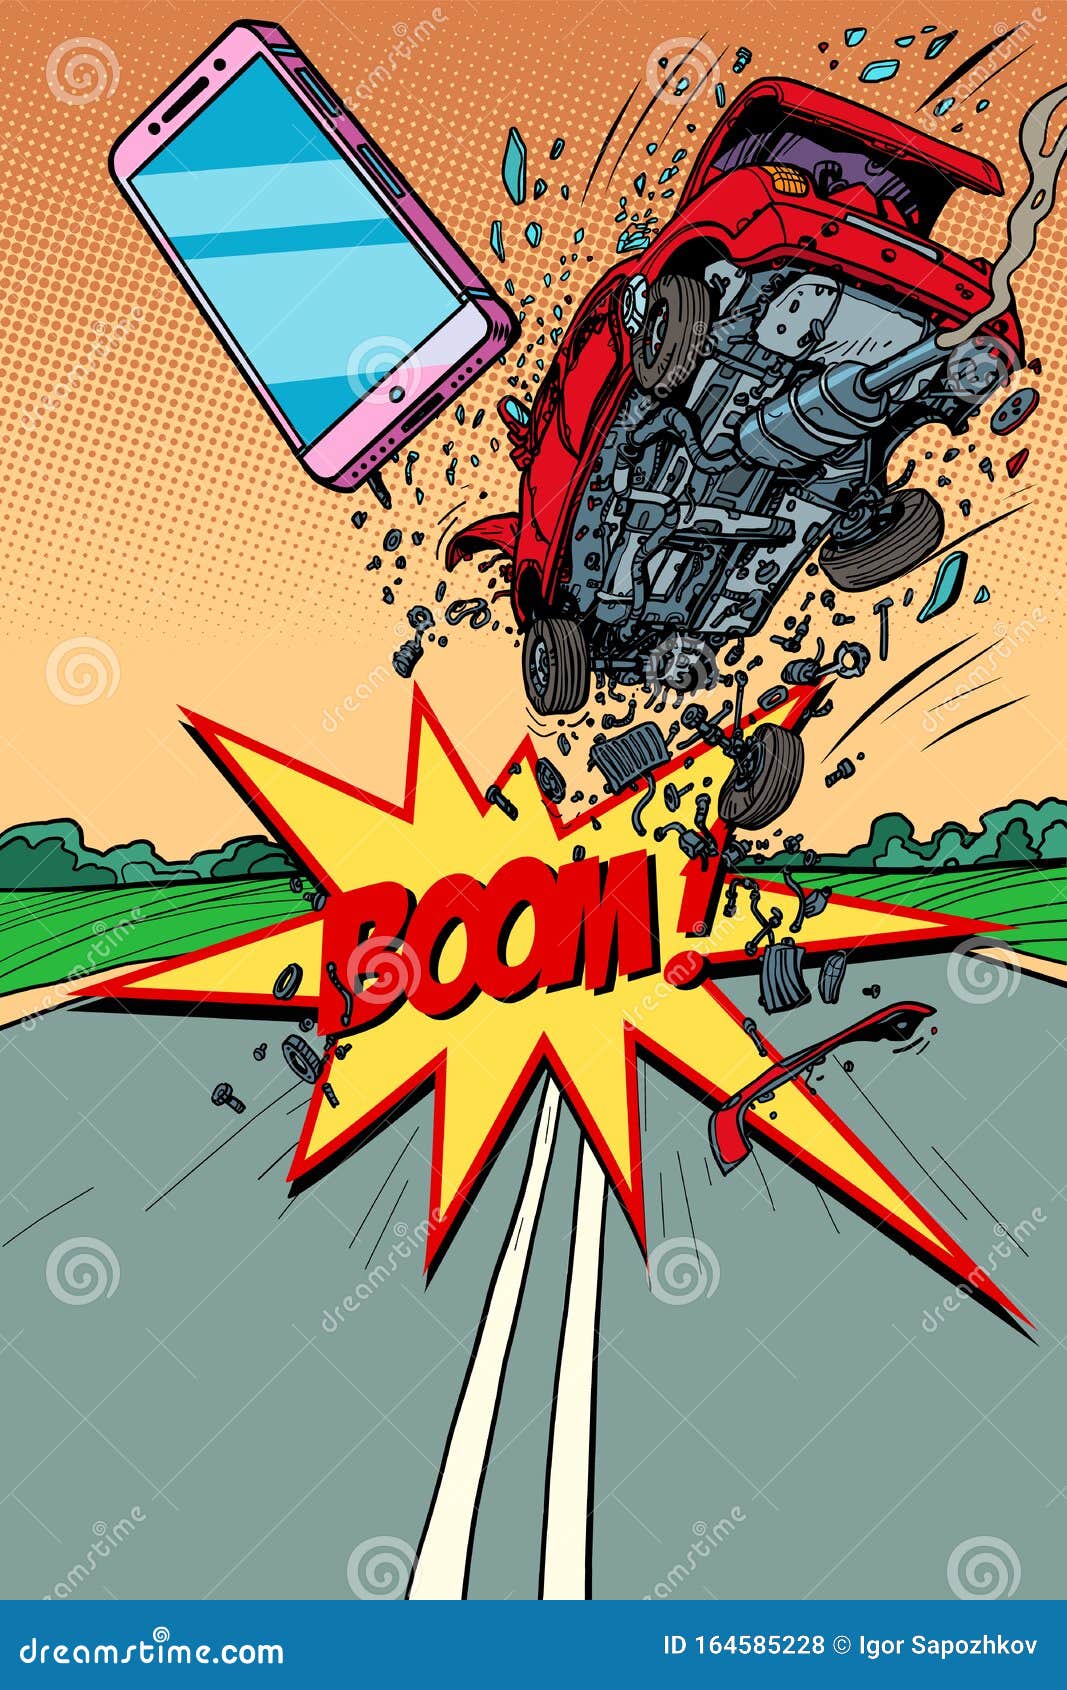 The Driver Was Distracted By A Smartphone And The Car Crashed Stock Vector Illustration Of Natural Beware